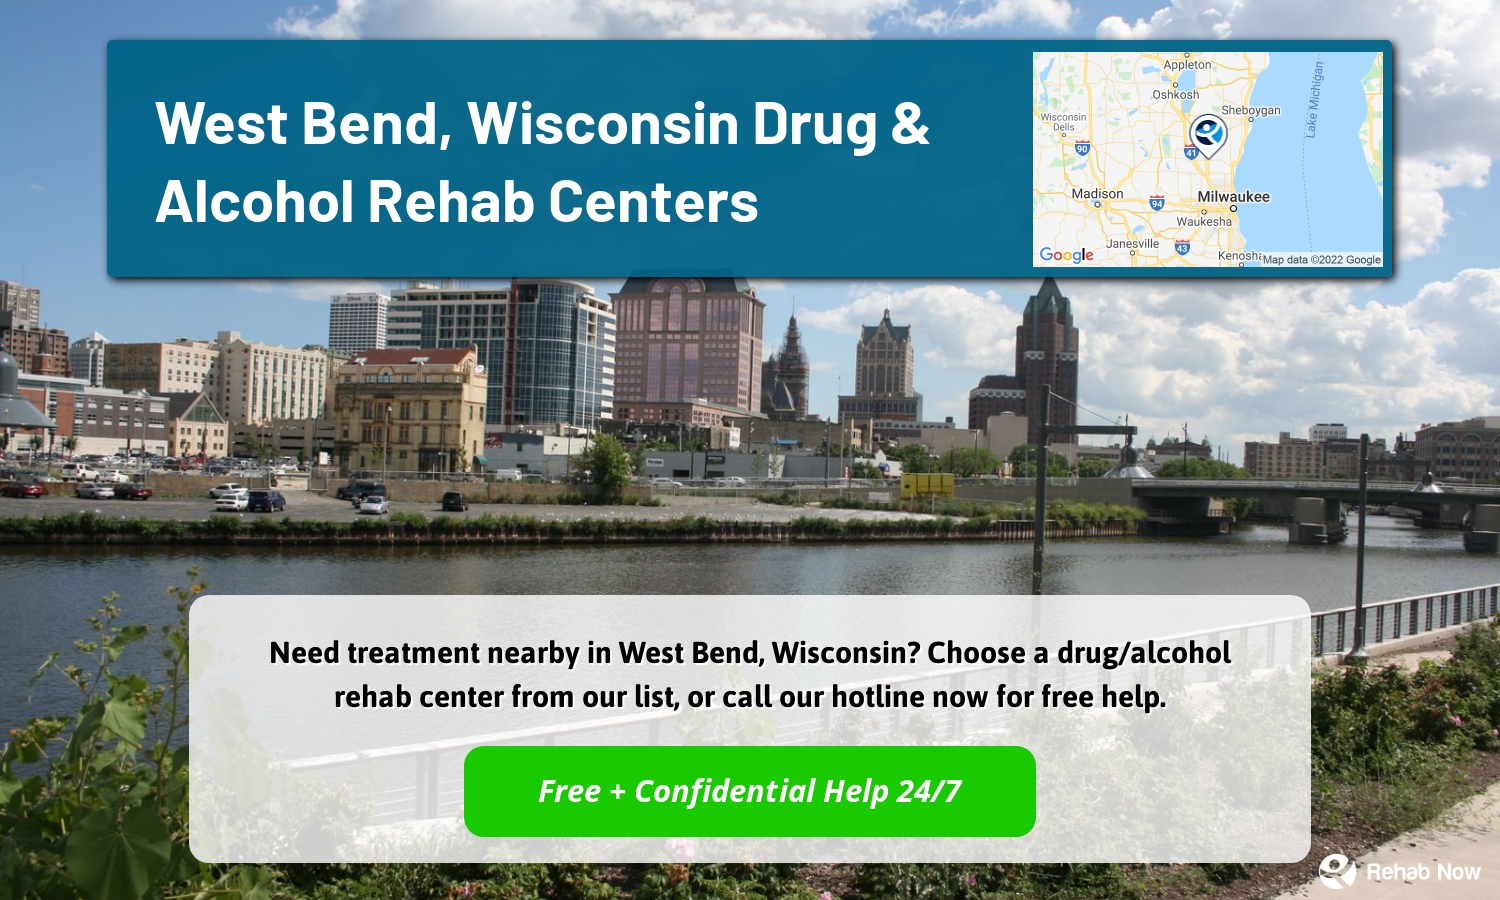 Need treatment nearby in West Bend, Wisconsin? Choose a drug/alcohol rehab center from our list, or call our hotline now for free help.